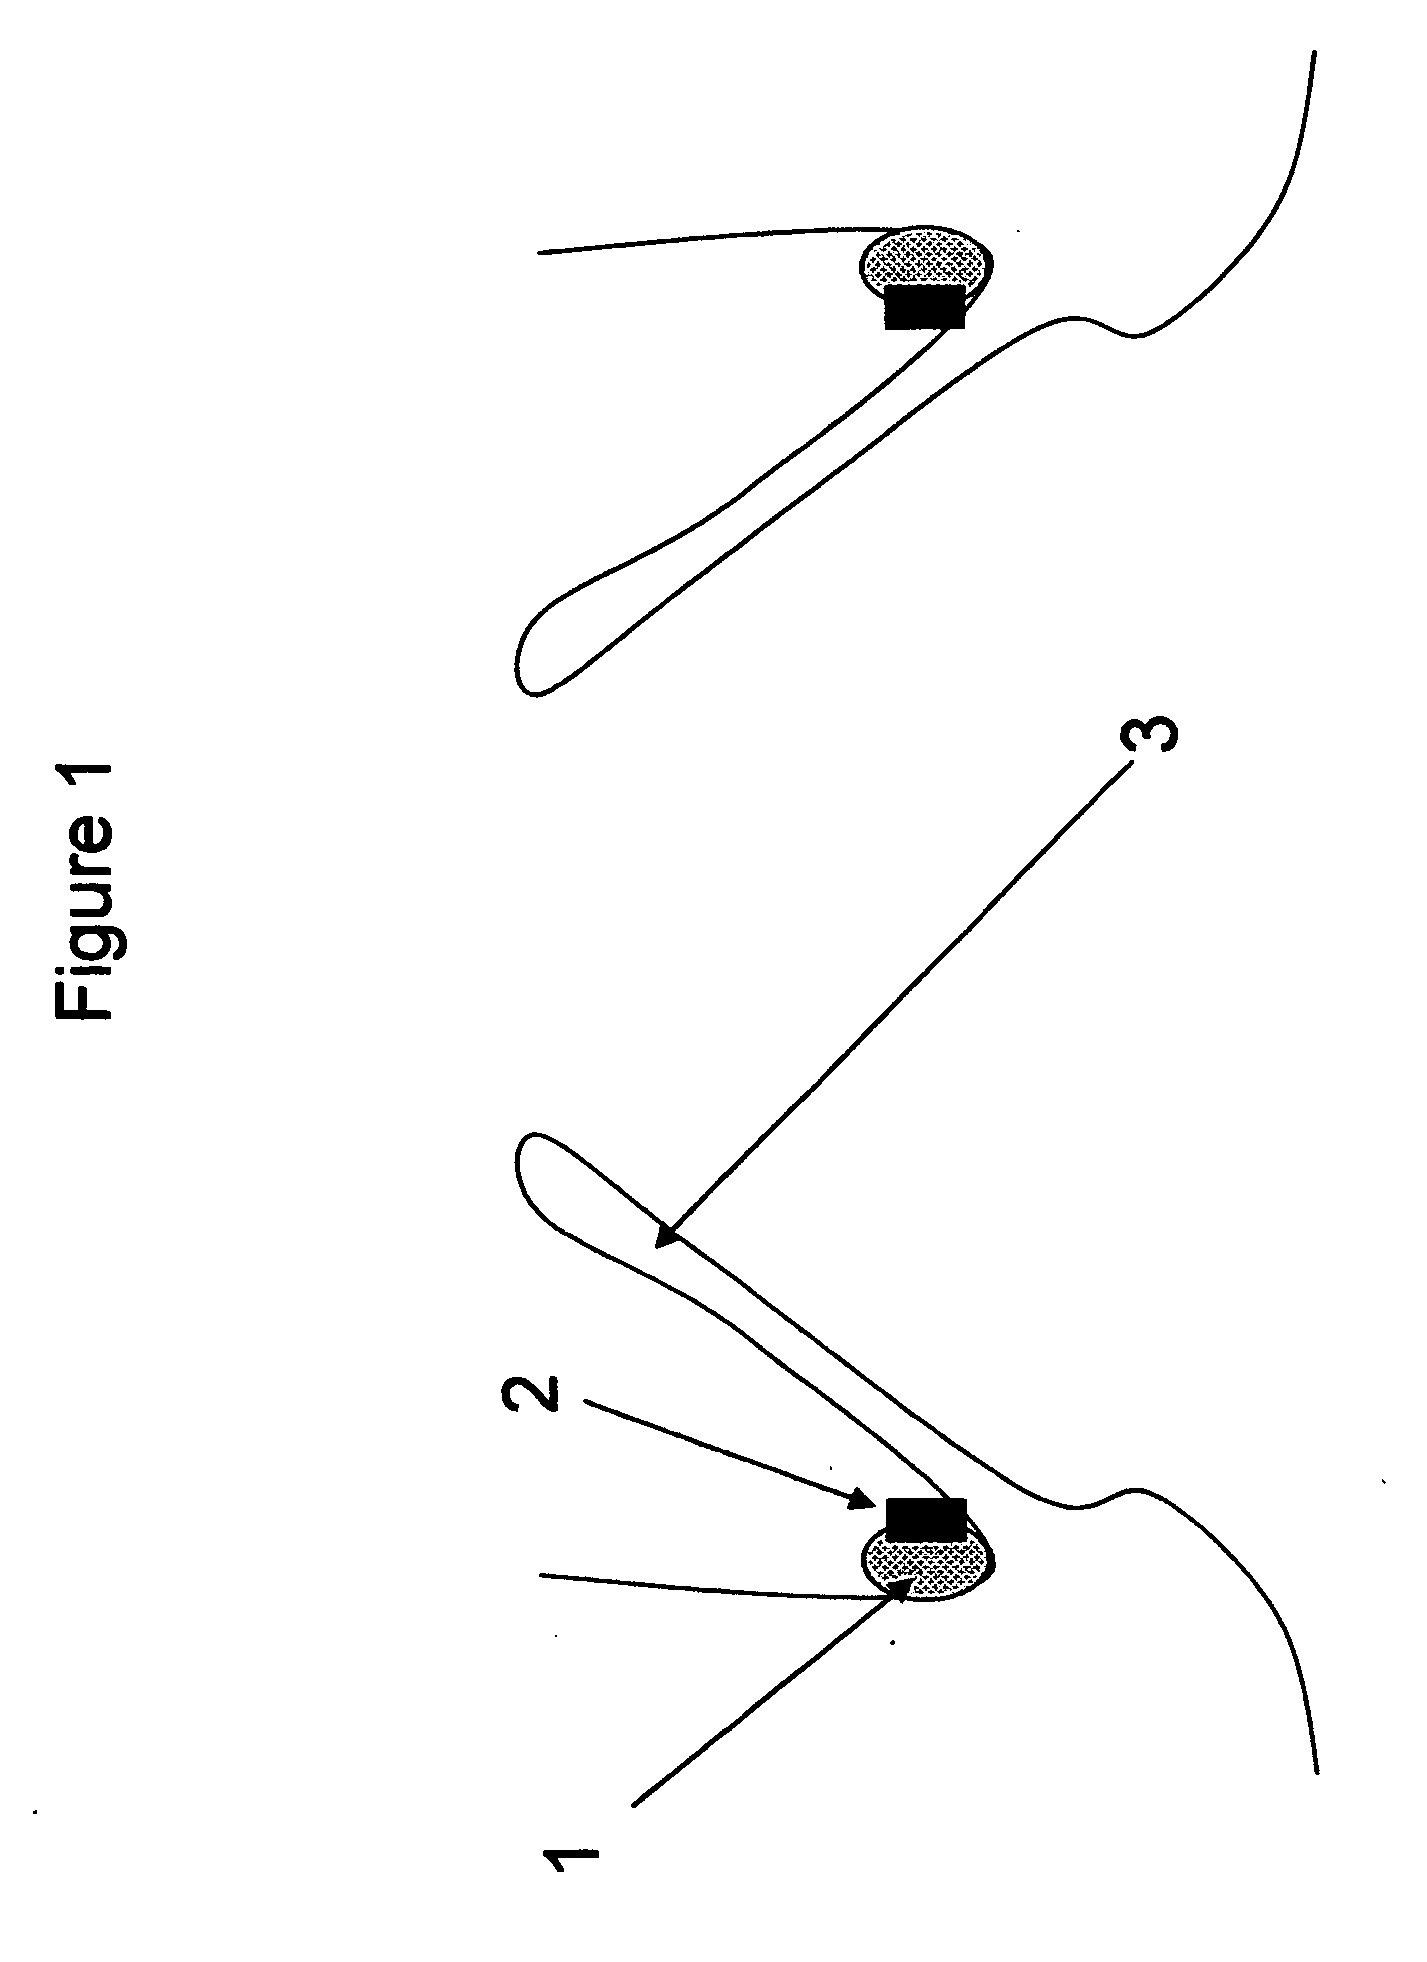 Method and apparatus for anchoring implants